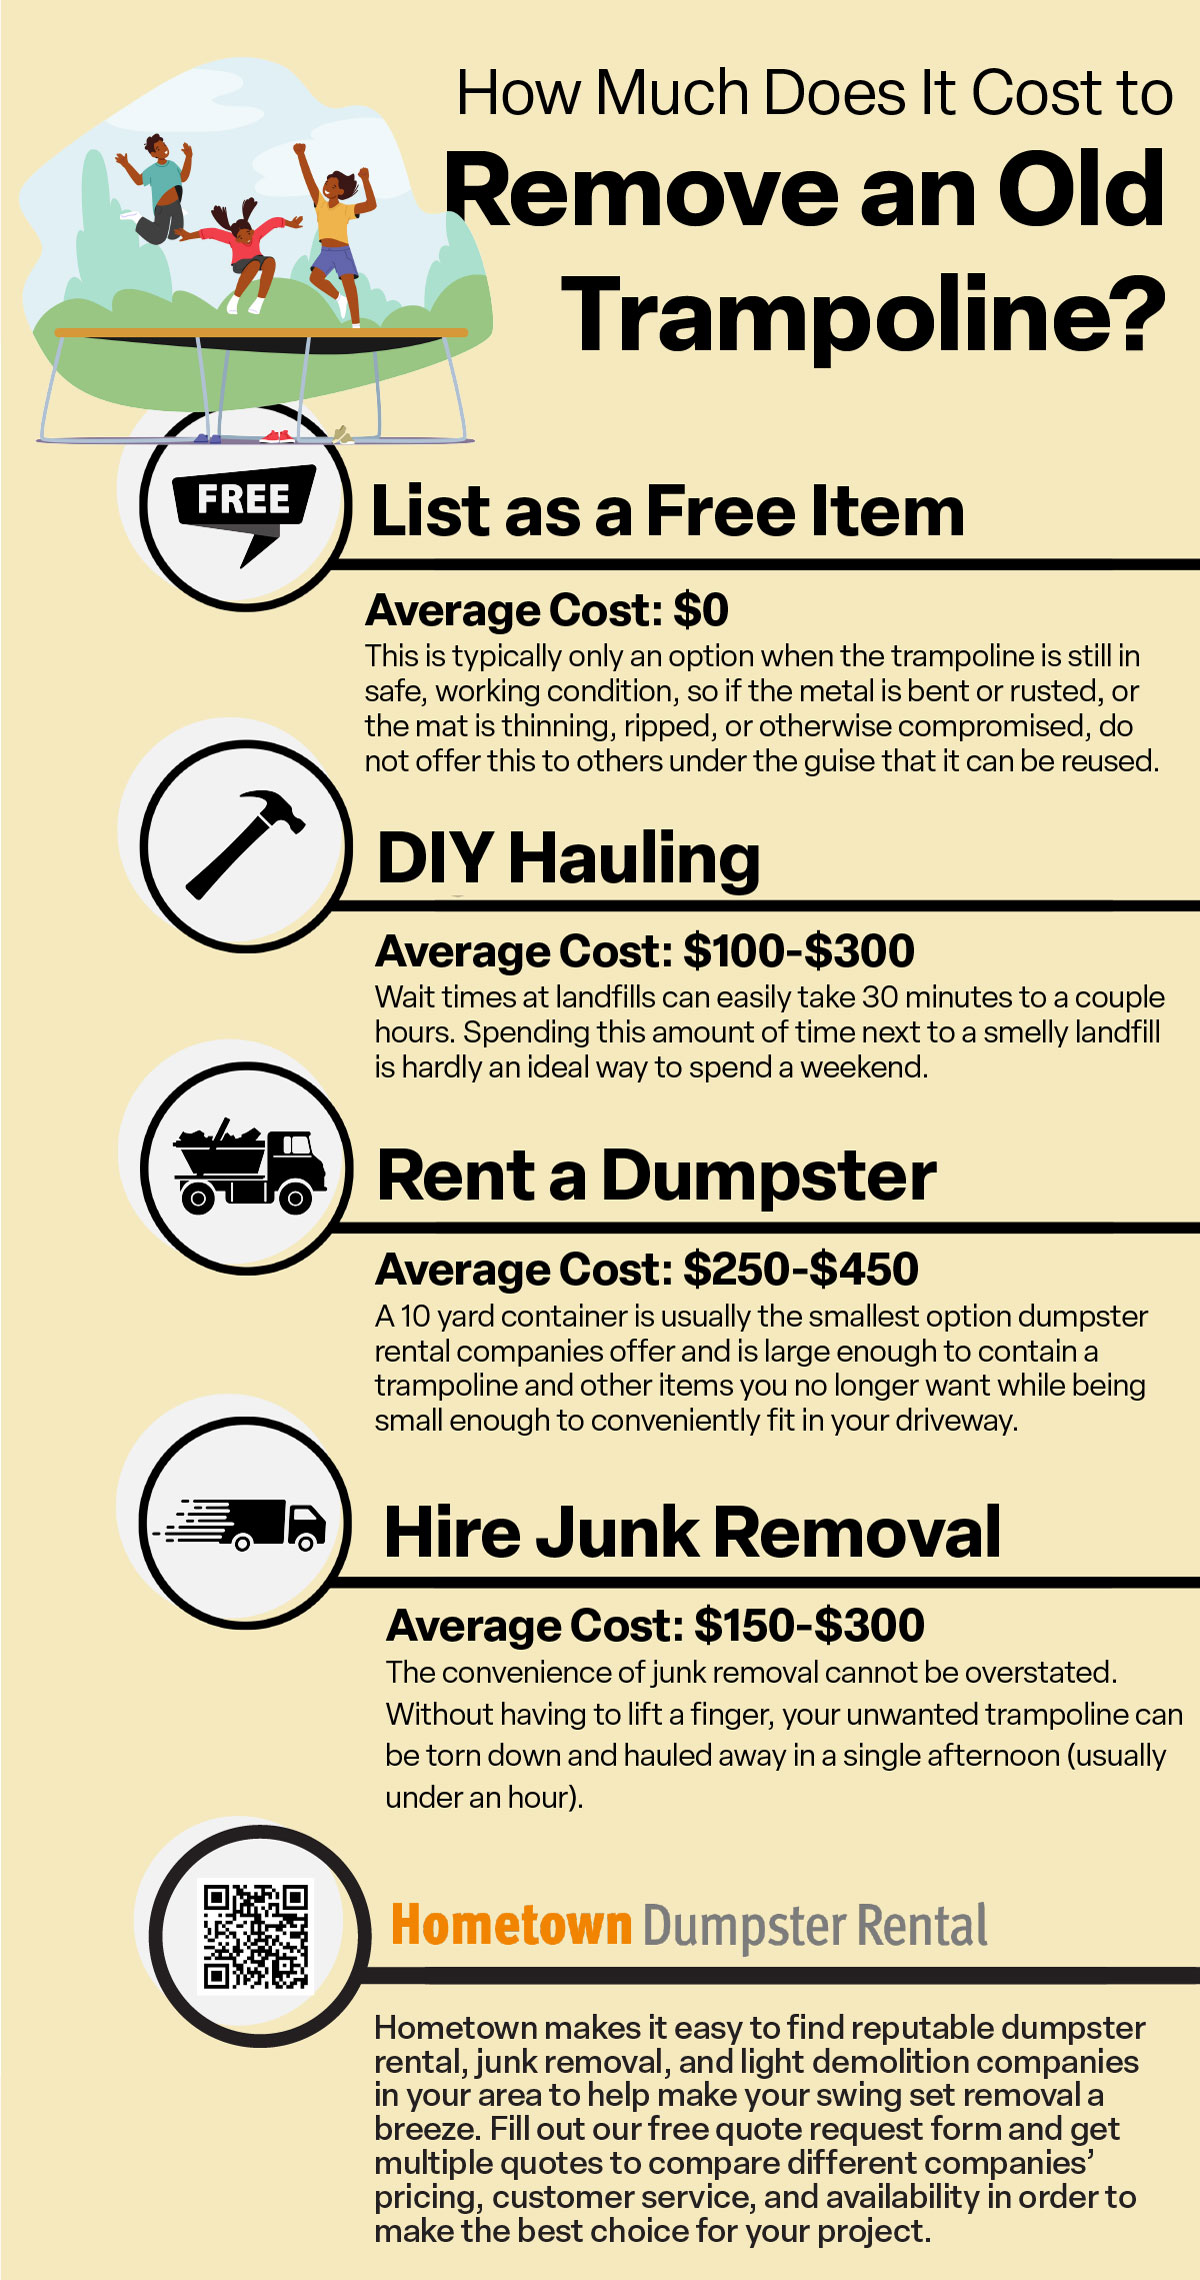 How Much Does It Cost to Remove an Old Trampoline? Infographic